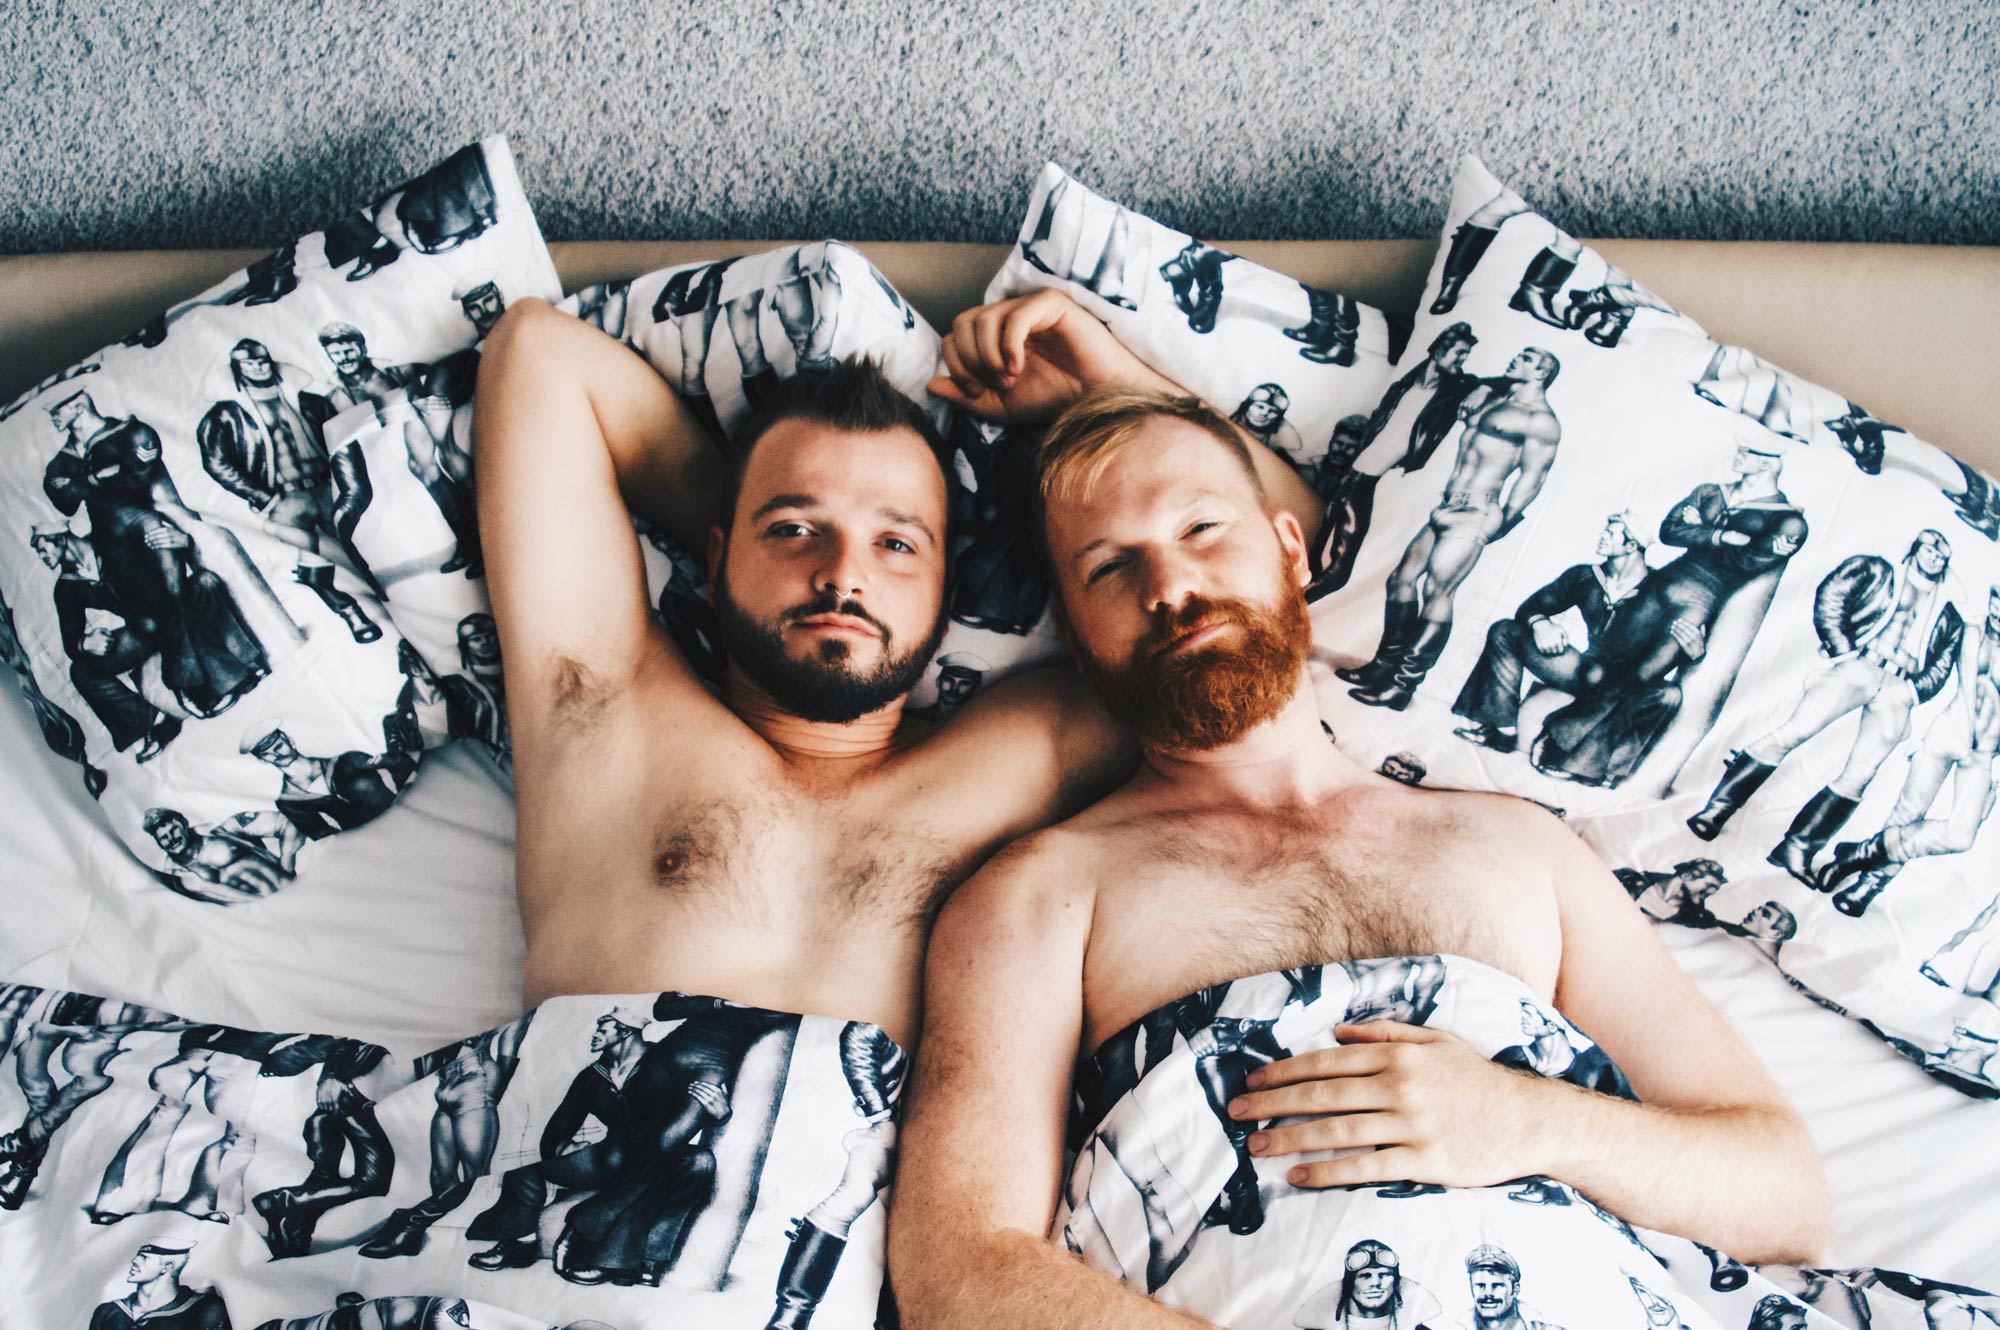 Tom of Finland Paket sexy naked couple of men Gay Travel Blogger half naked Good morning out of our Tom of Finland bed | Klaus K Hotel Helsinki Gay-friendly Tom of Finland Package © Coupleofmen.com